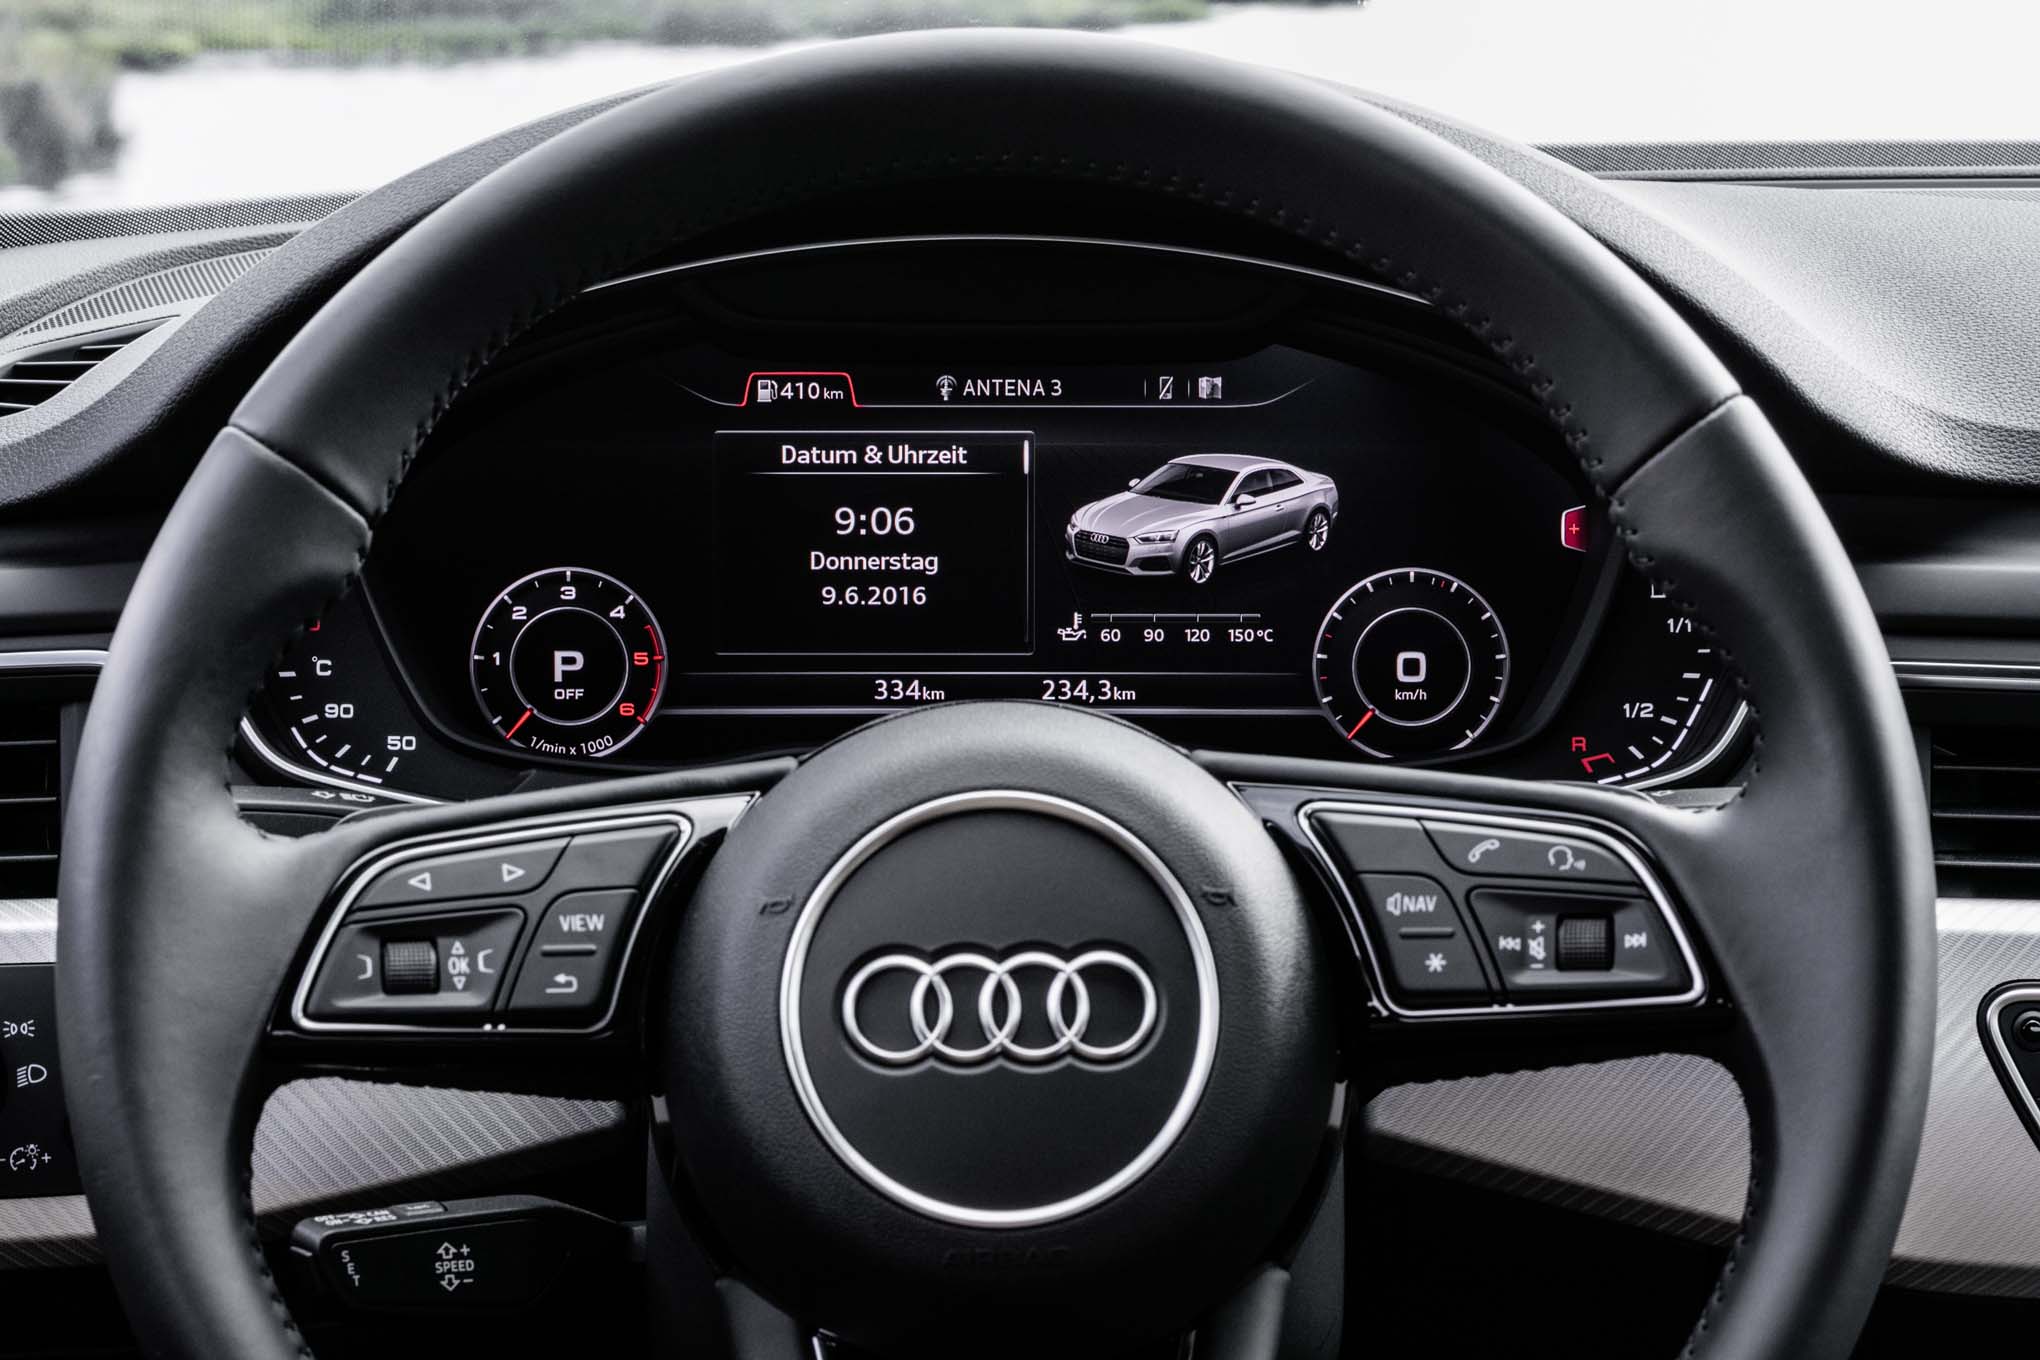 Audi to Open Pilot Facility in Switzerland for Synthetic Diesel